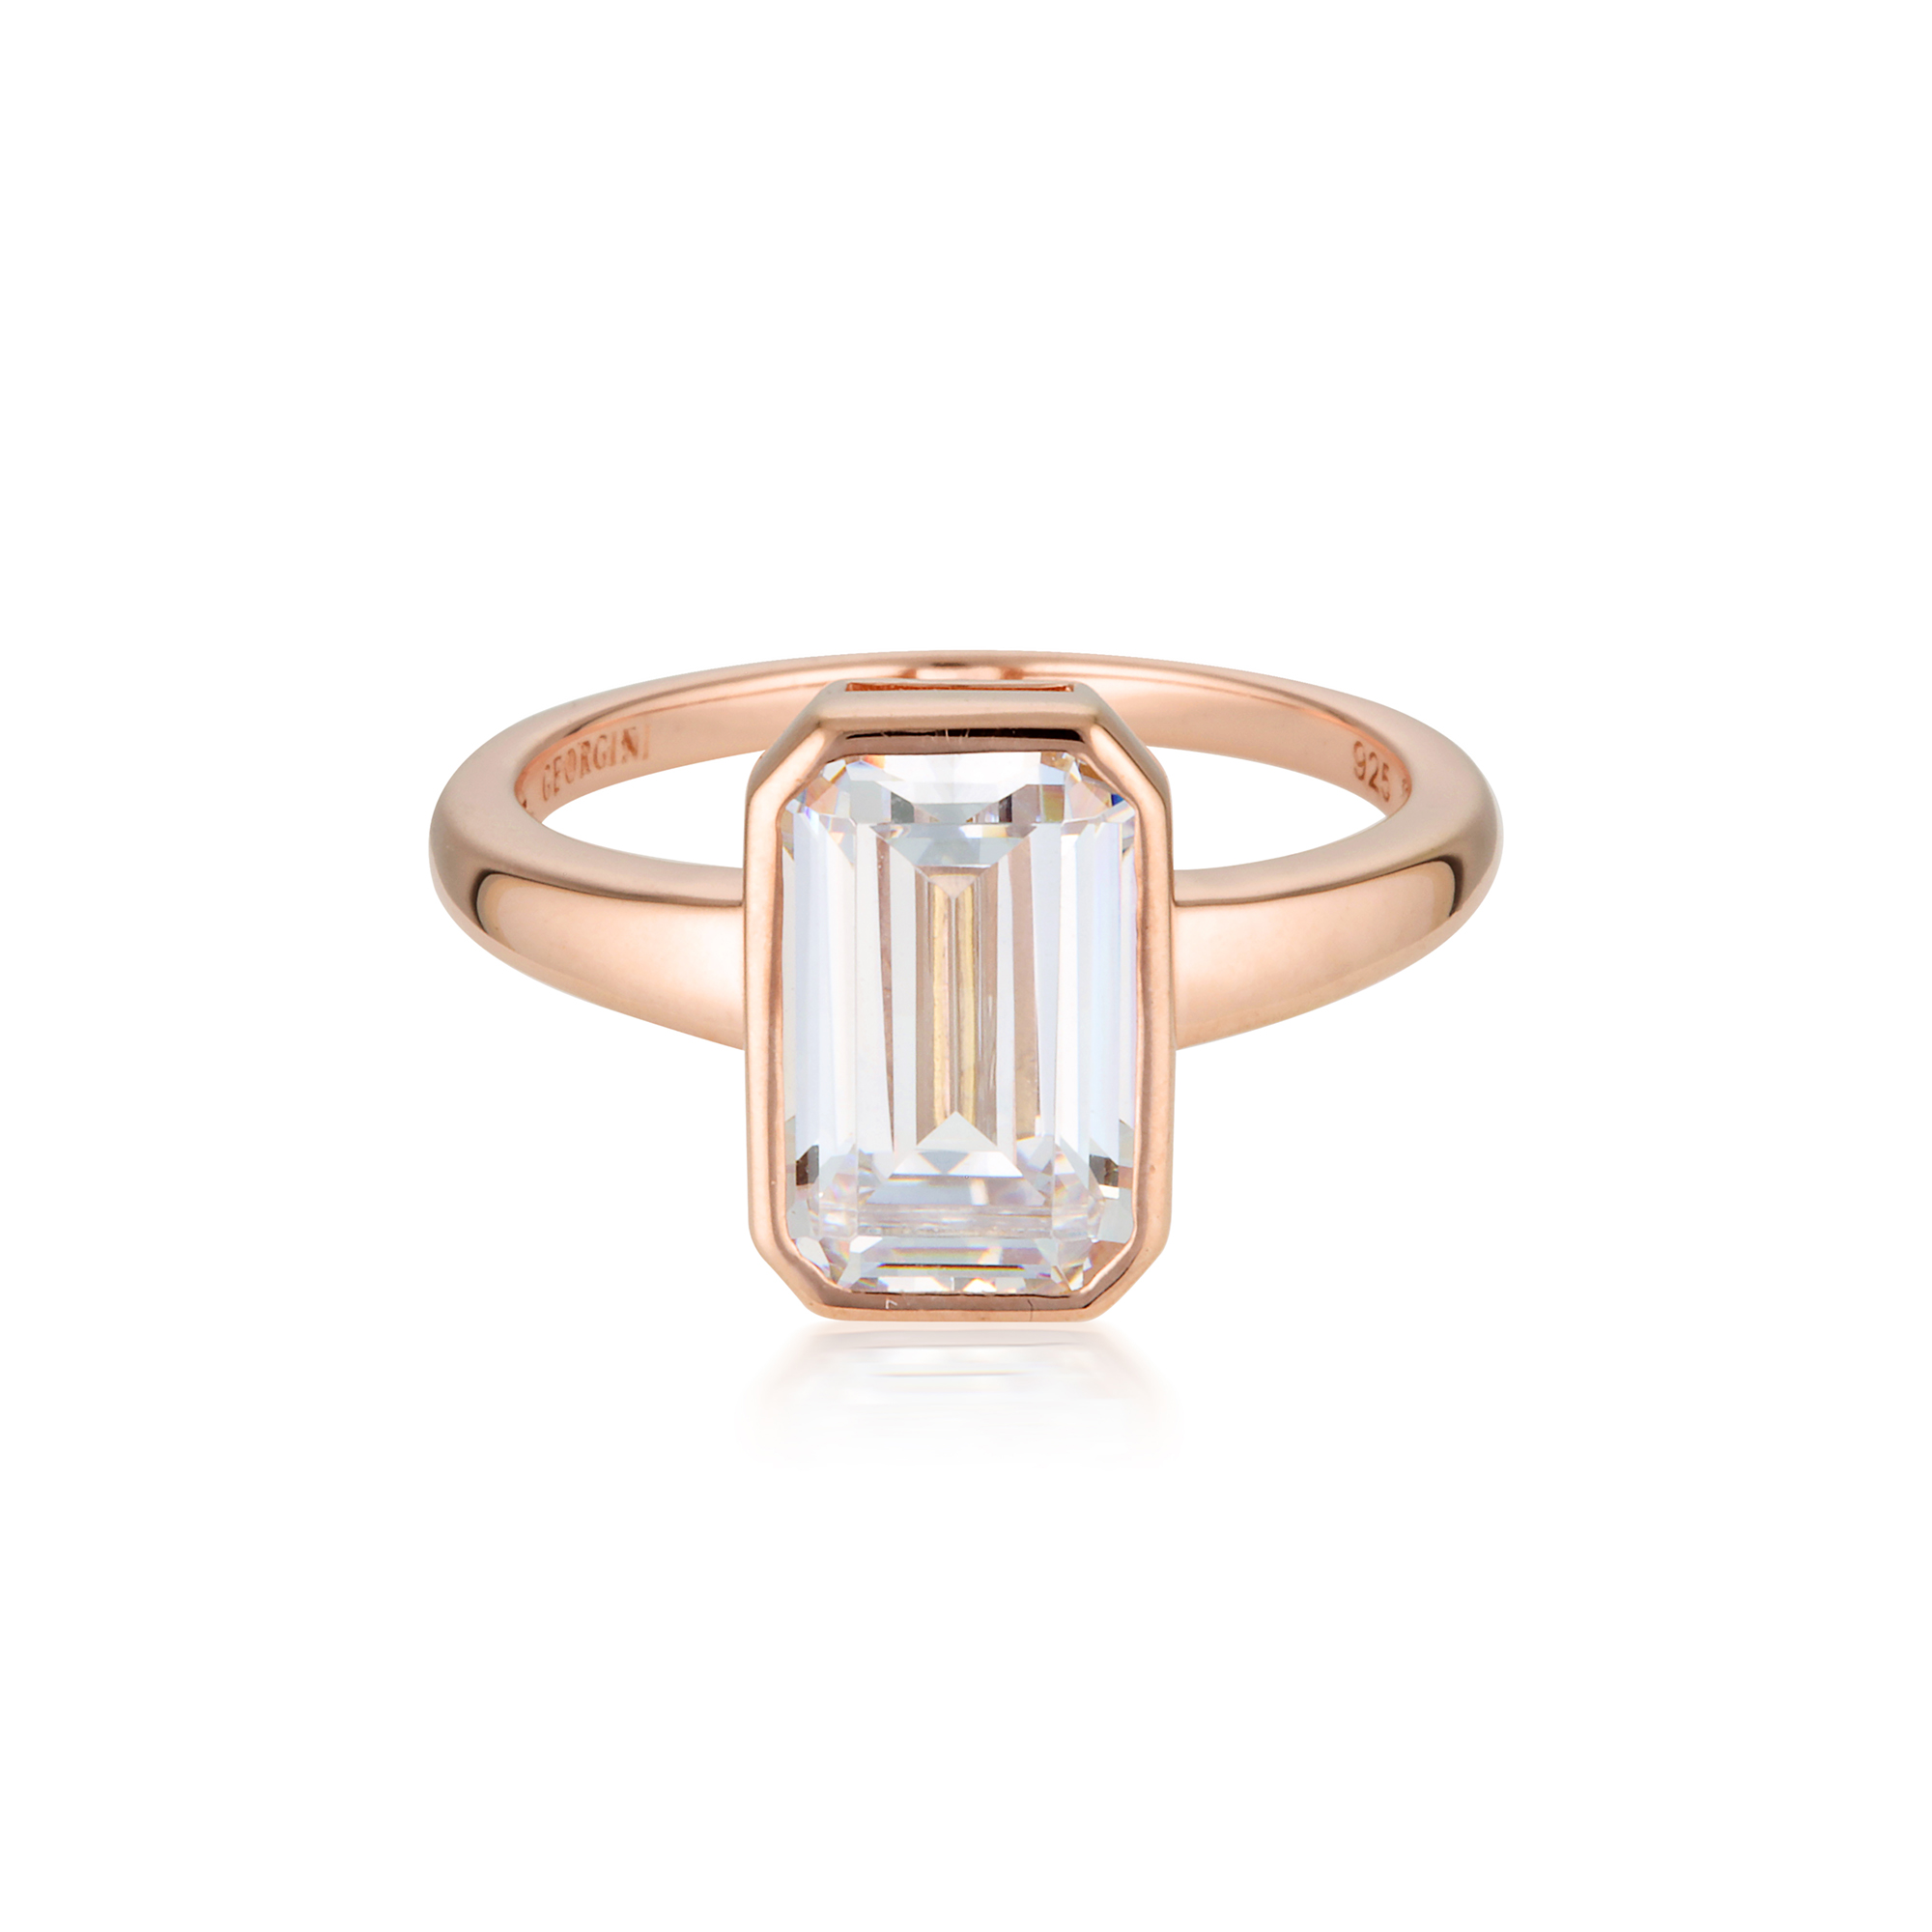 Georgini Luxe Rose Gold Plated Sterling Silver Sontuosa Ring